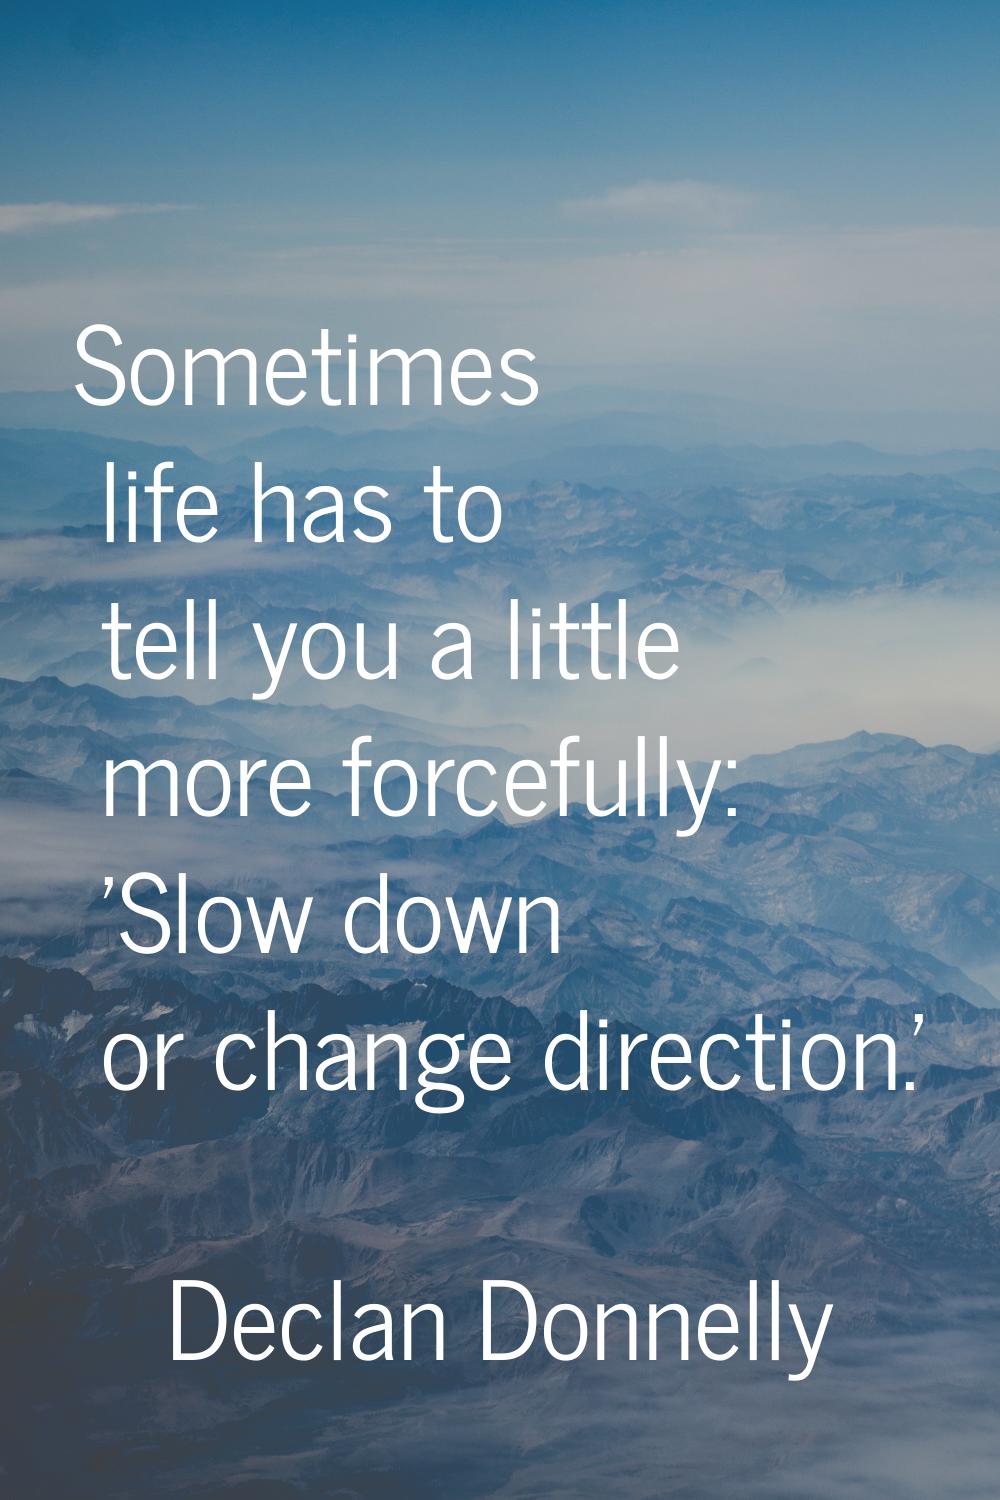 Sometimes life has to tell you a little more forcefully: 'Slow down or change direction.'